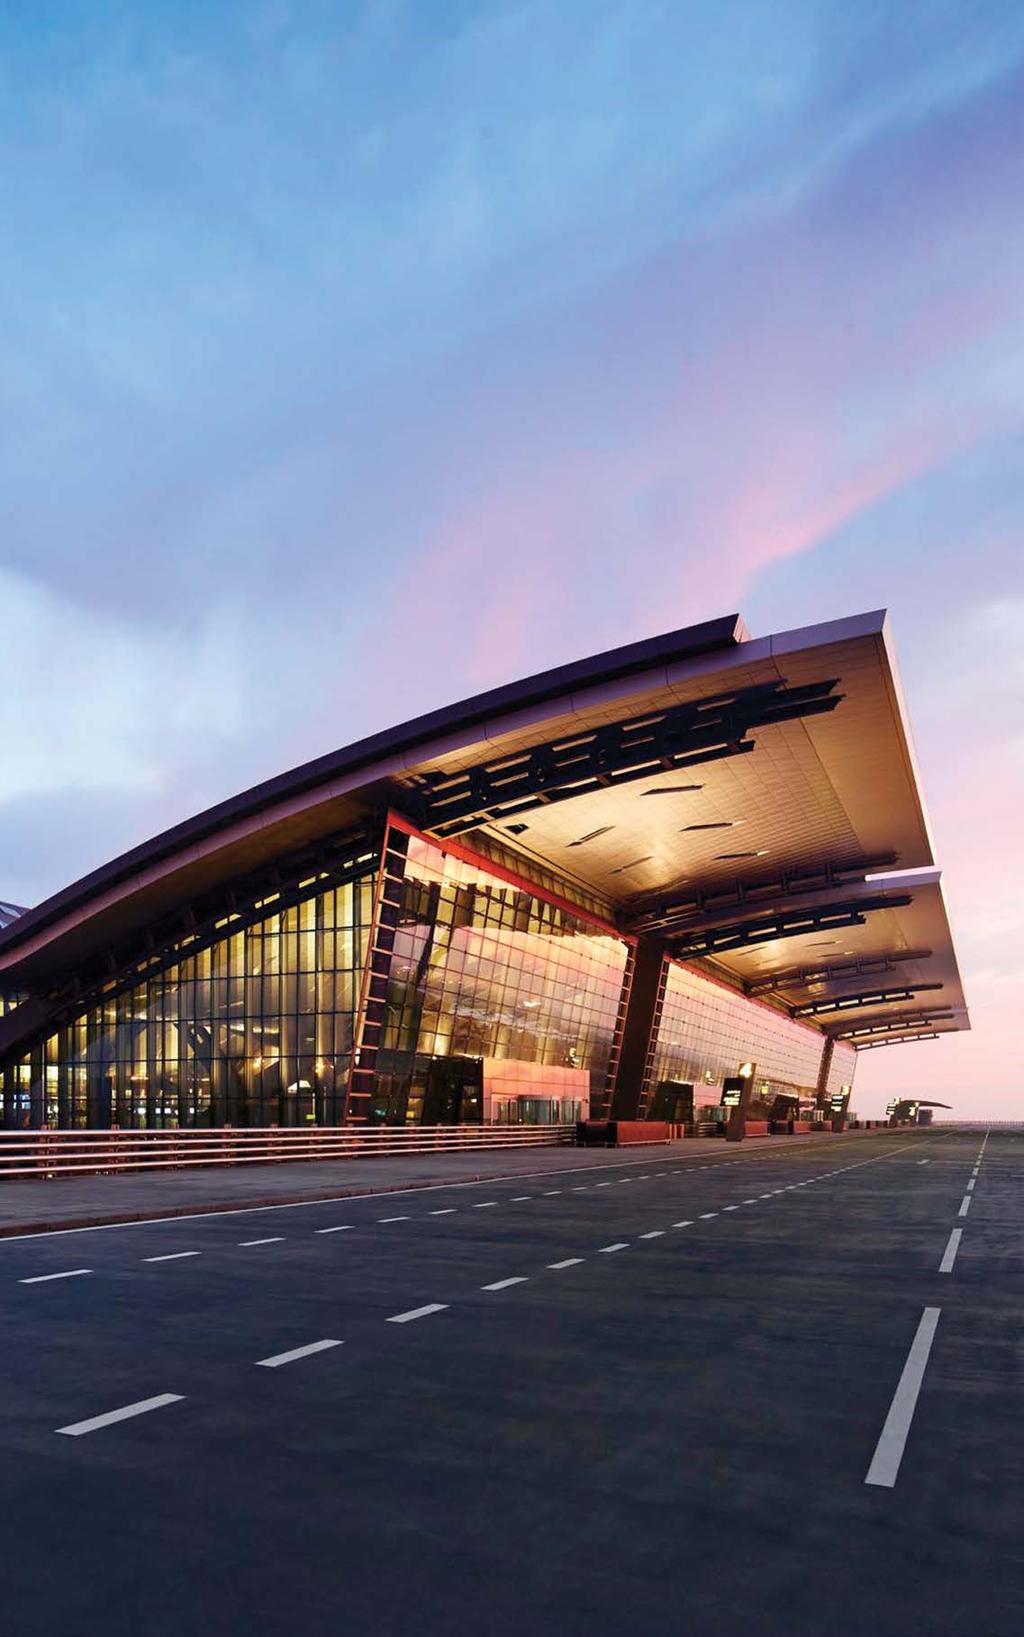 Set over 22 square kilometres, and home to the consistently award-winning Qatar Airways, the 600-square-metre passenger terminal is the country s